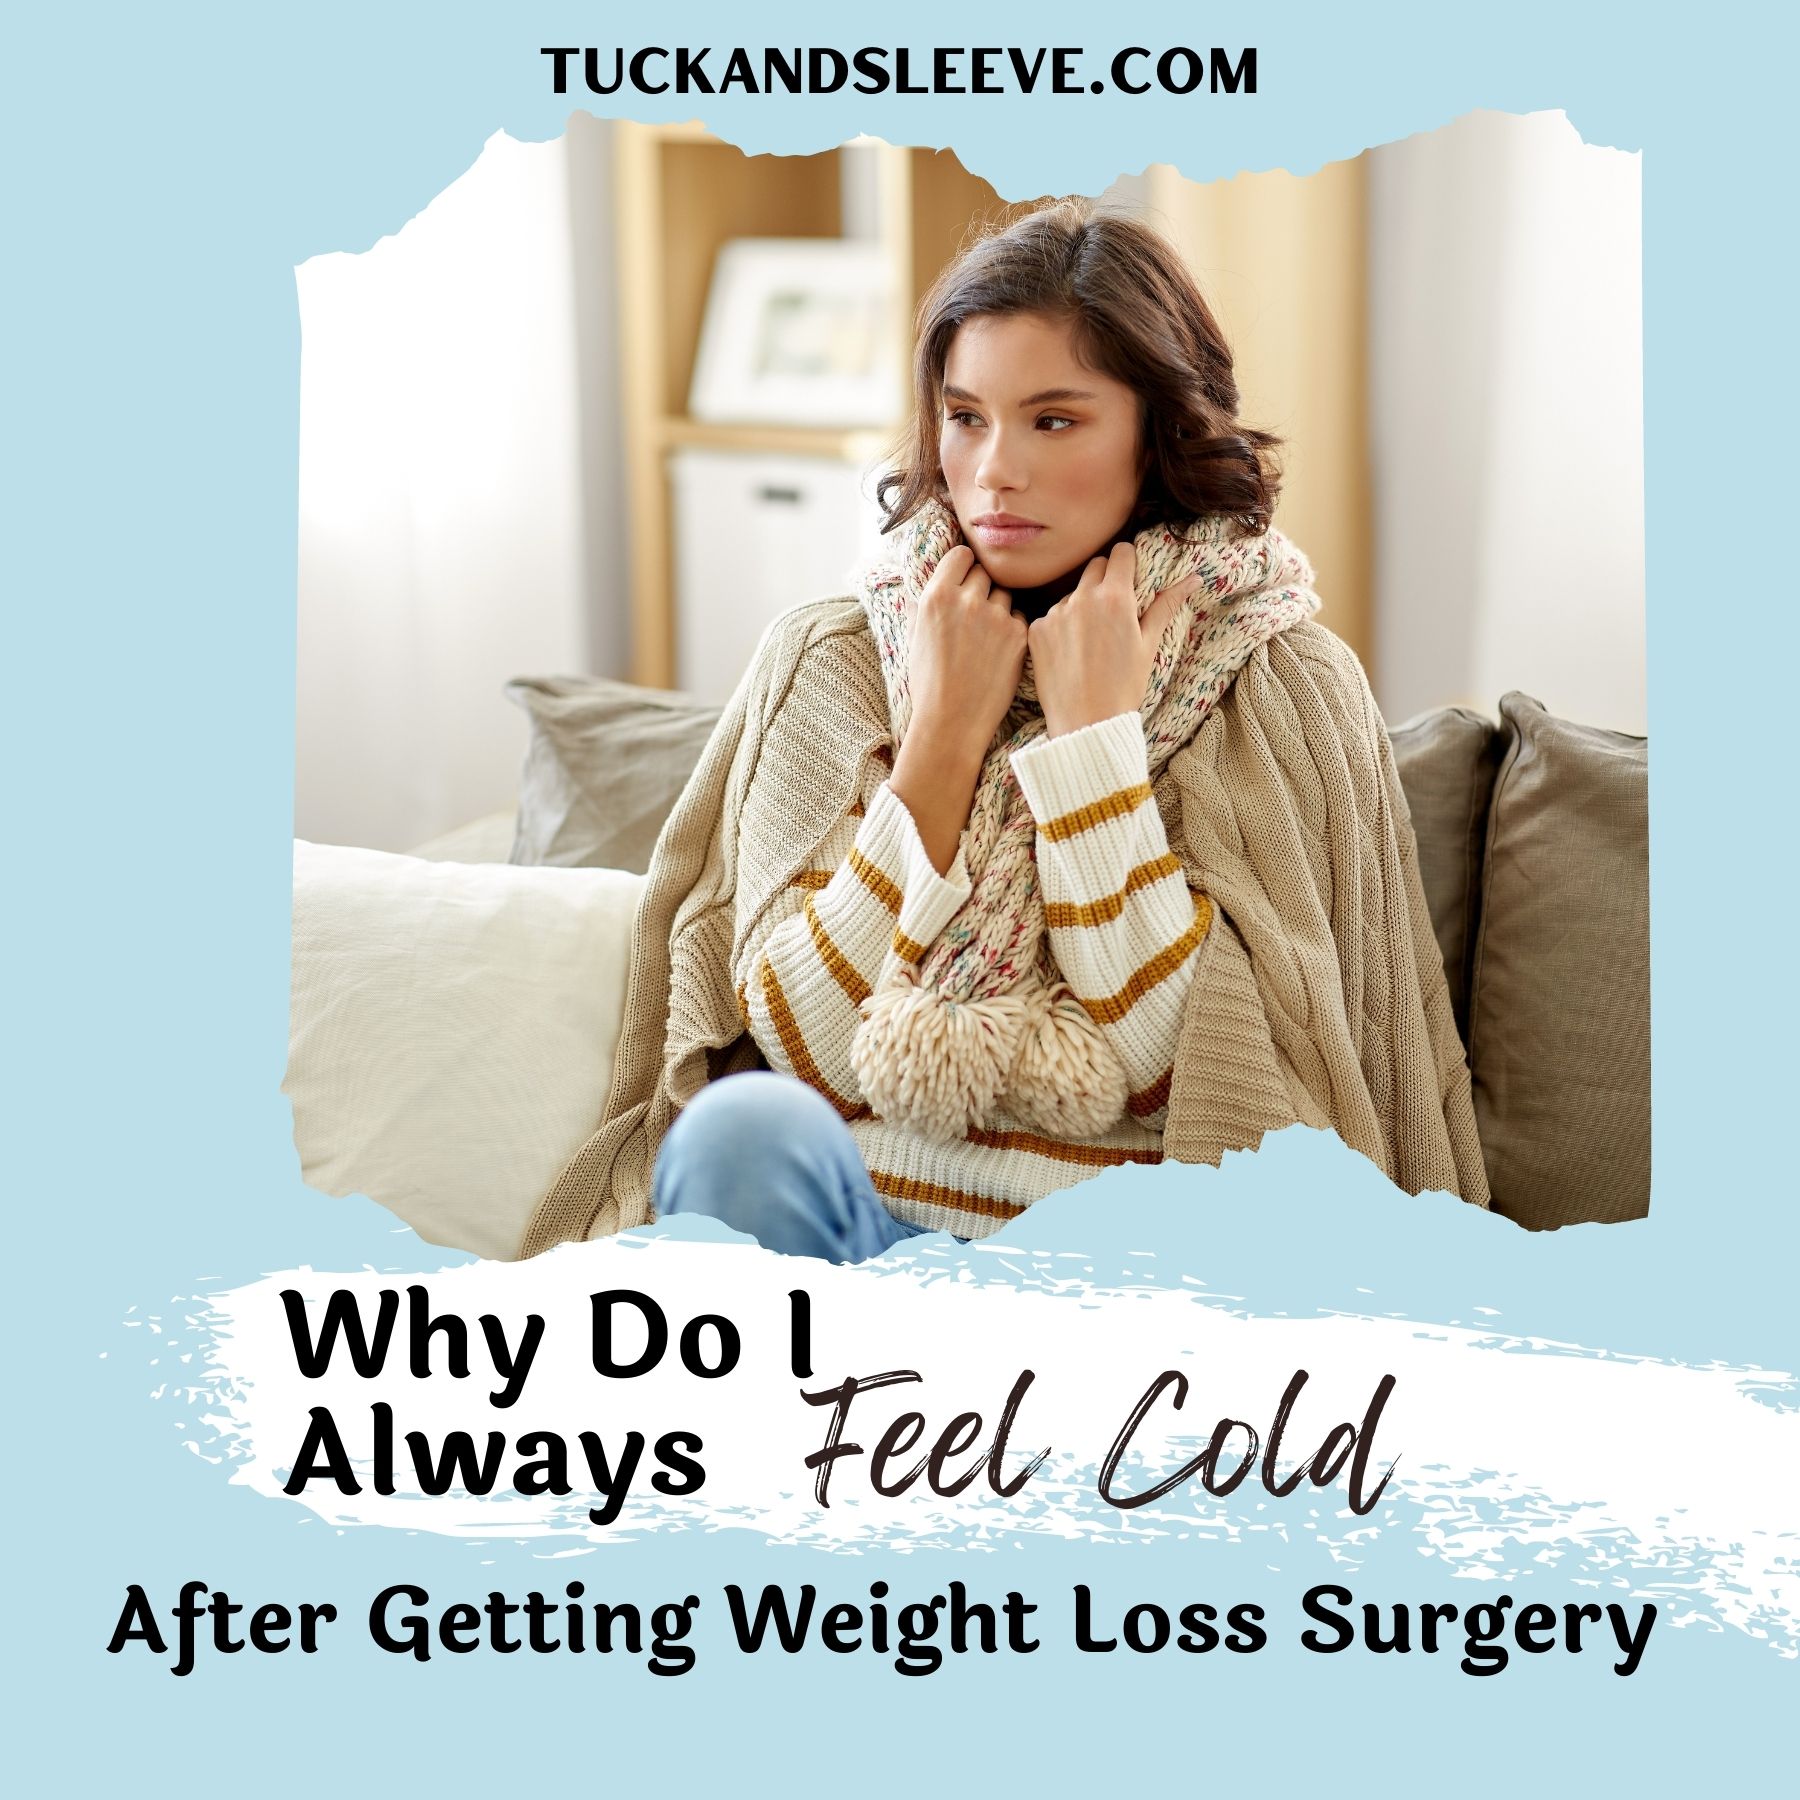 Why Am I Always Cold After Getting Weight Loss Surgery?